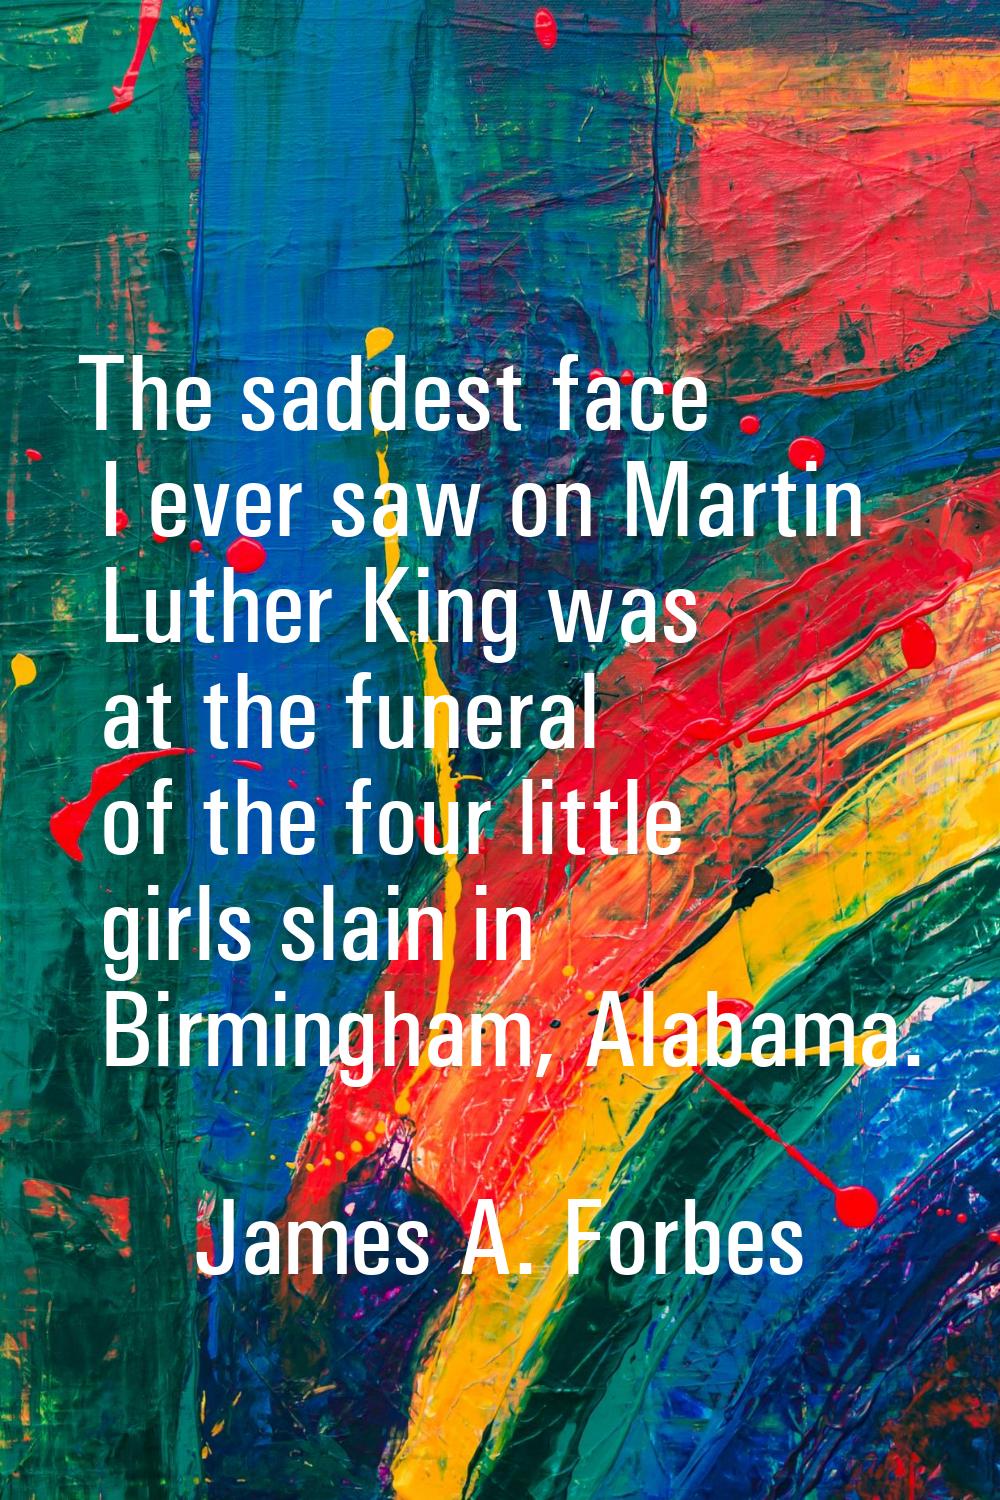 The saddest face I ever saw on Martin Luther King was at the funeral of the four little girls slain